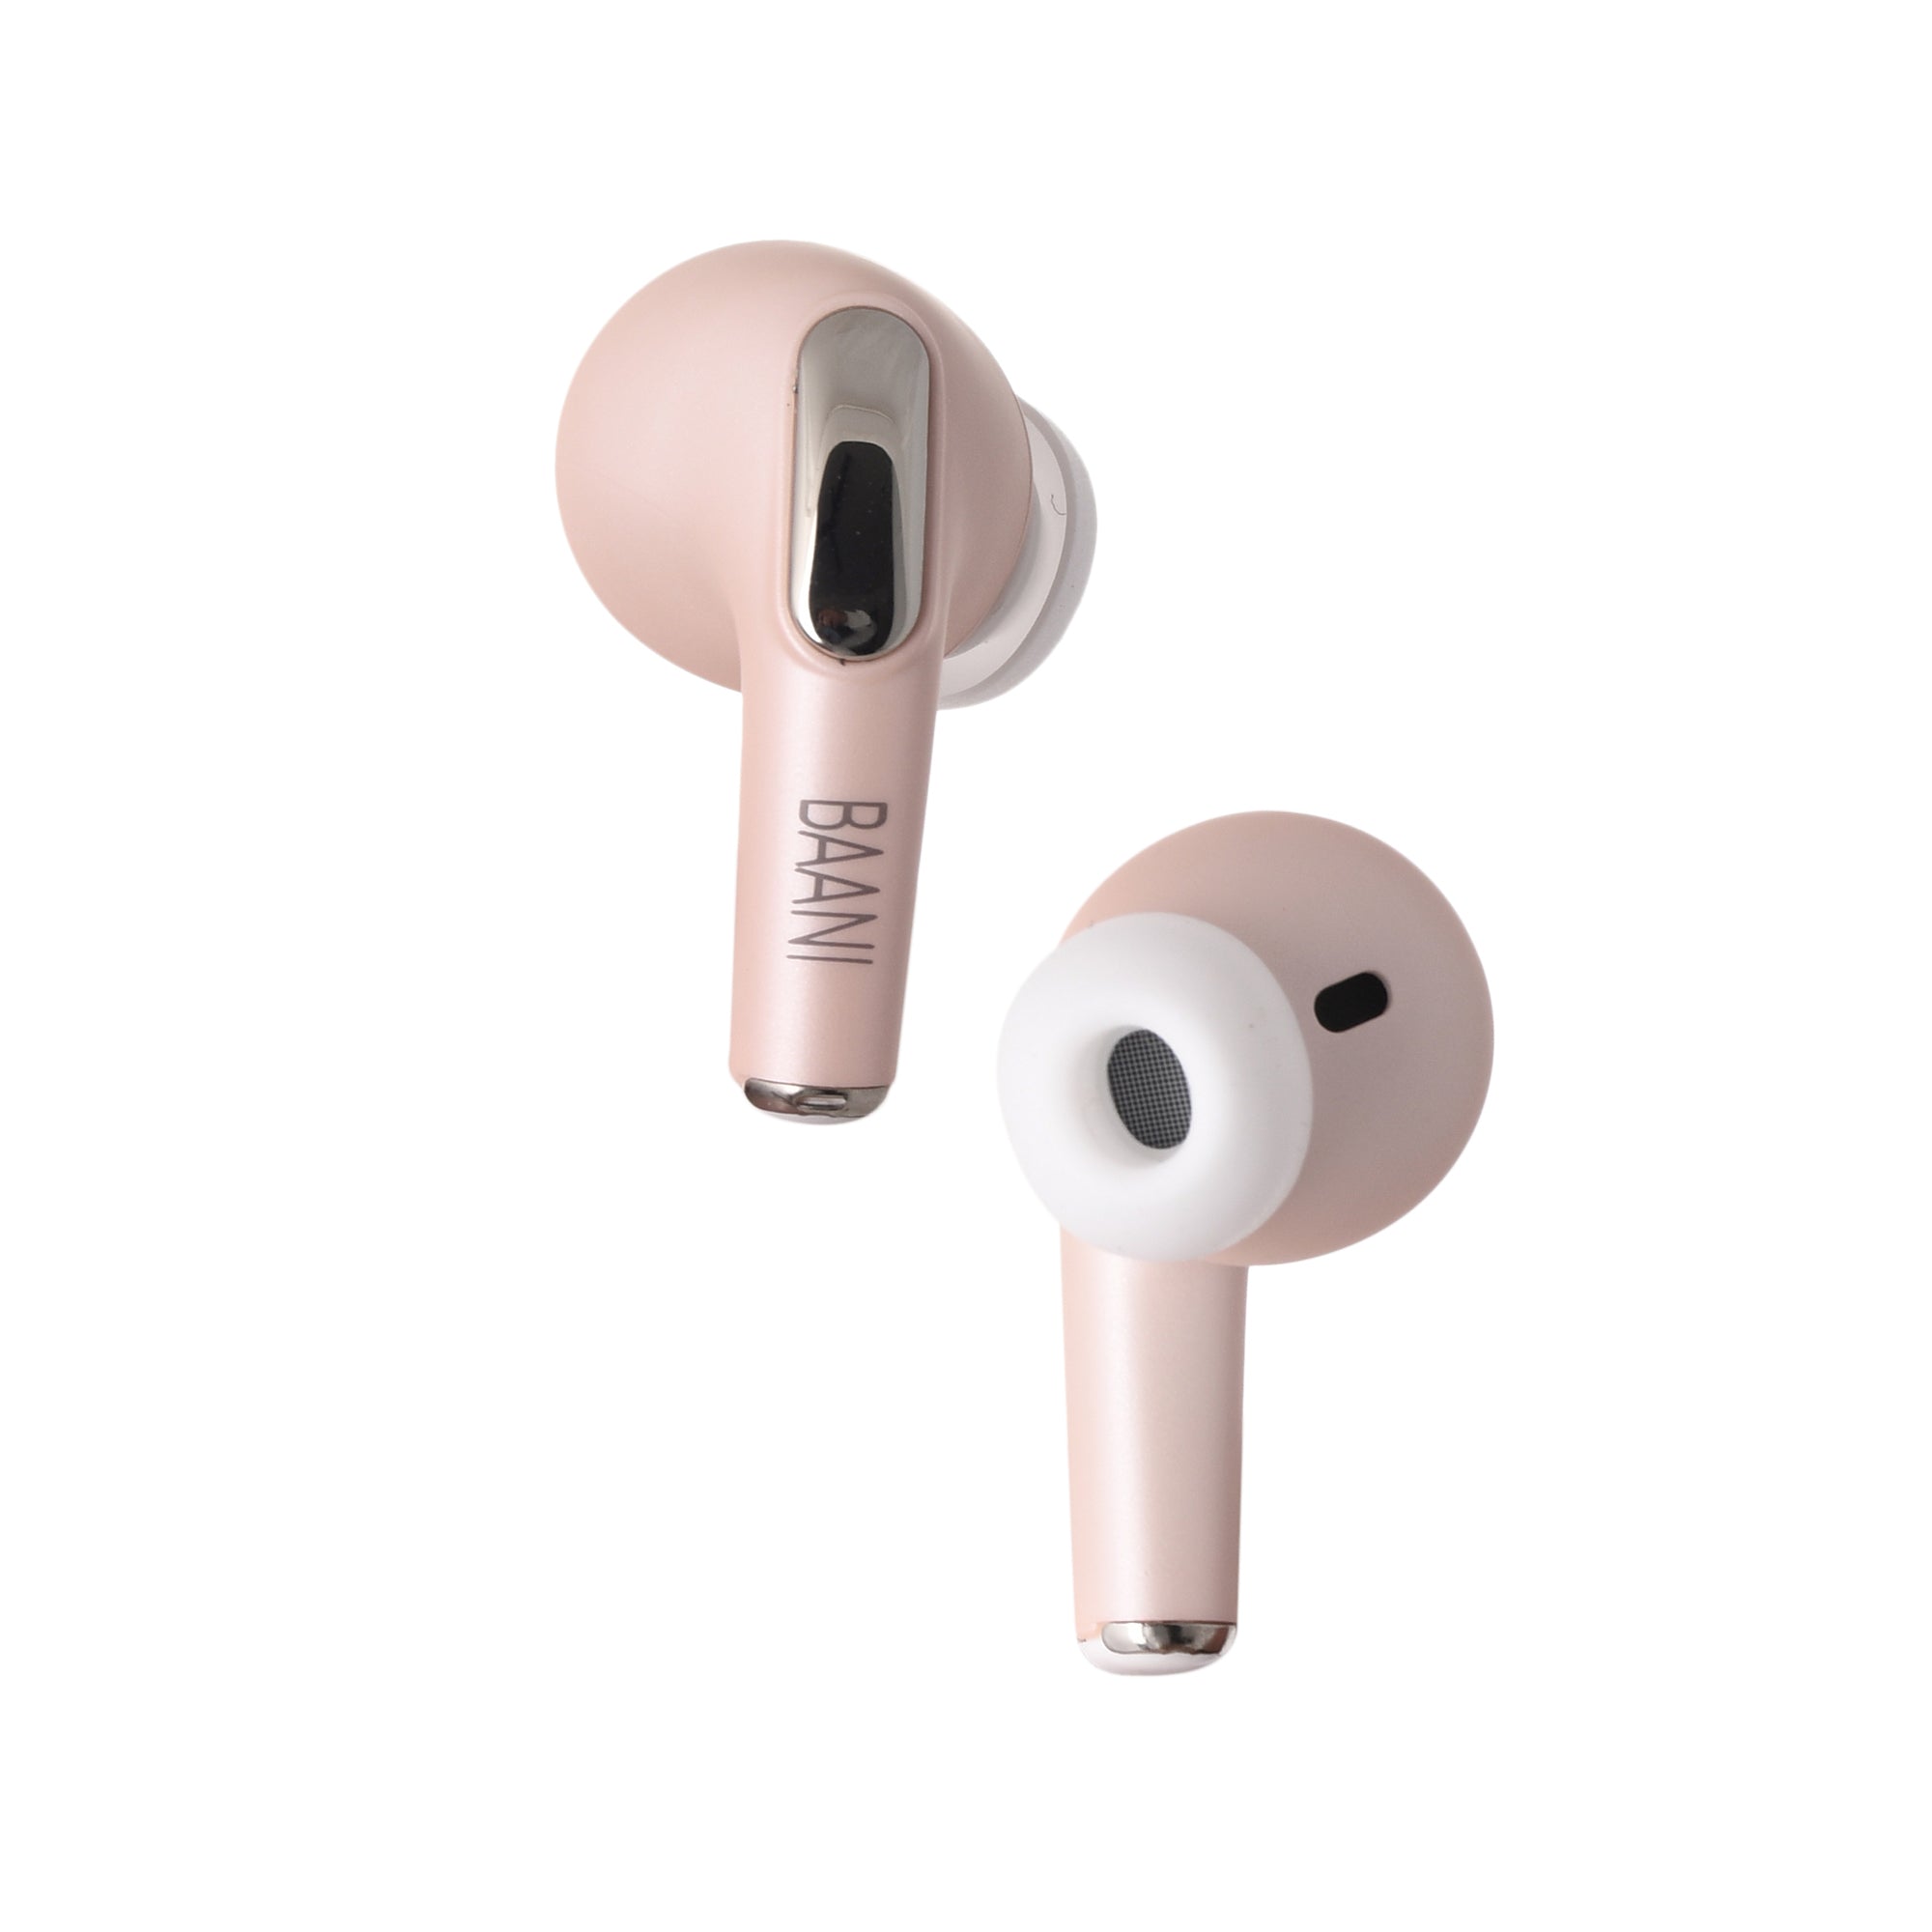 closeup of BT 102 earbuds by Baani Audio in pink colour